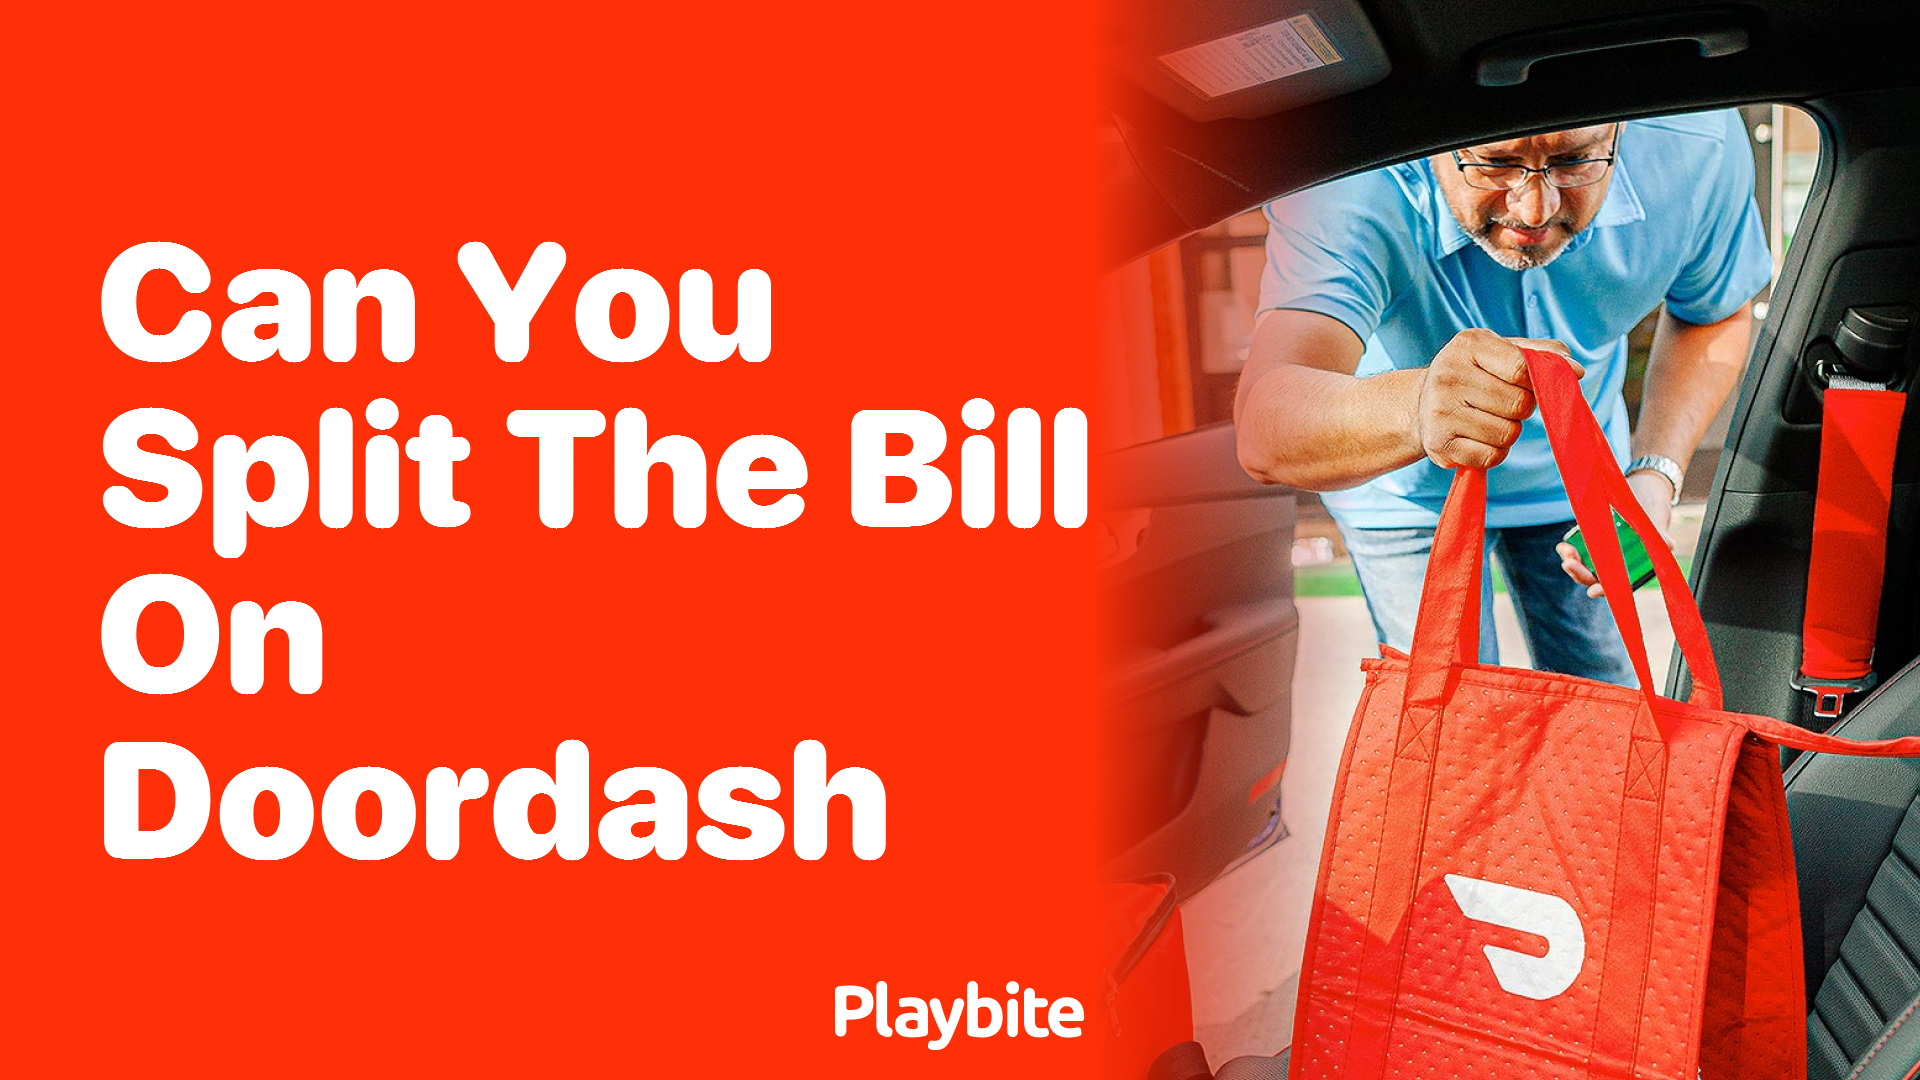 Can You Split the Bill on DoorDash? Let&#8217;s Find Out!